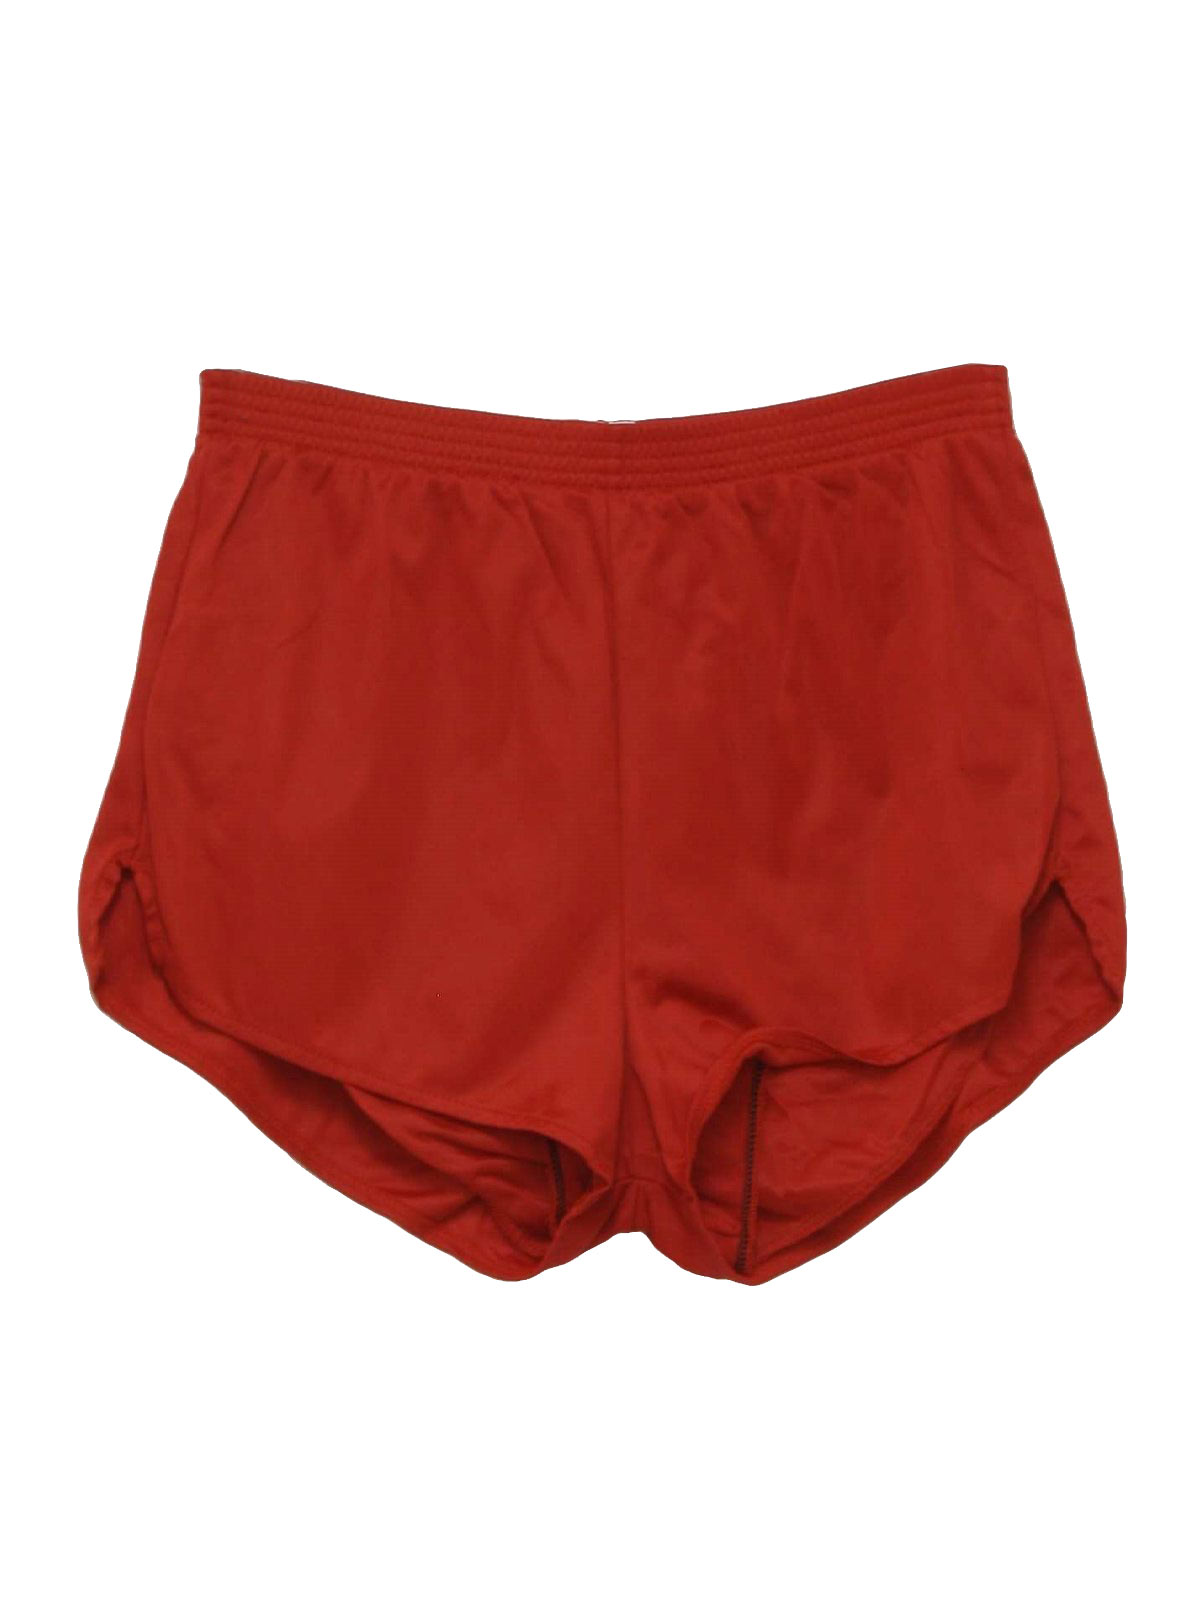 80's Vintage Shorts: 80s -Pacific Coast- Mens red nylon totally 80s ...